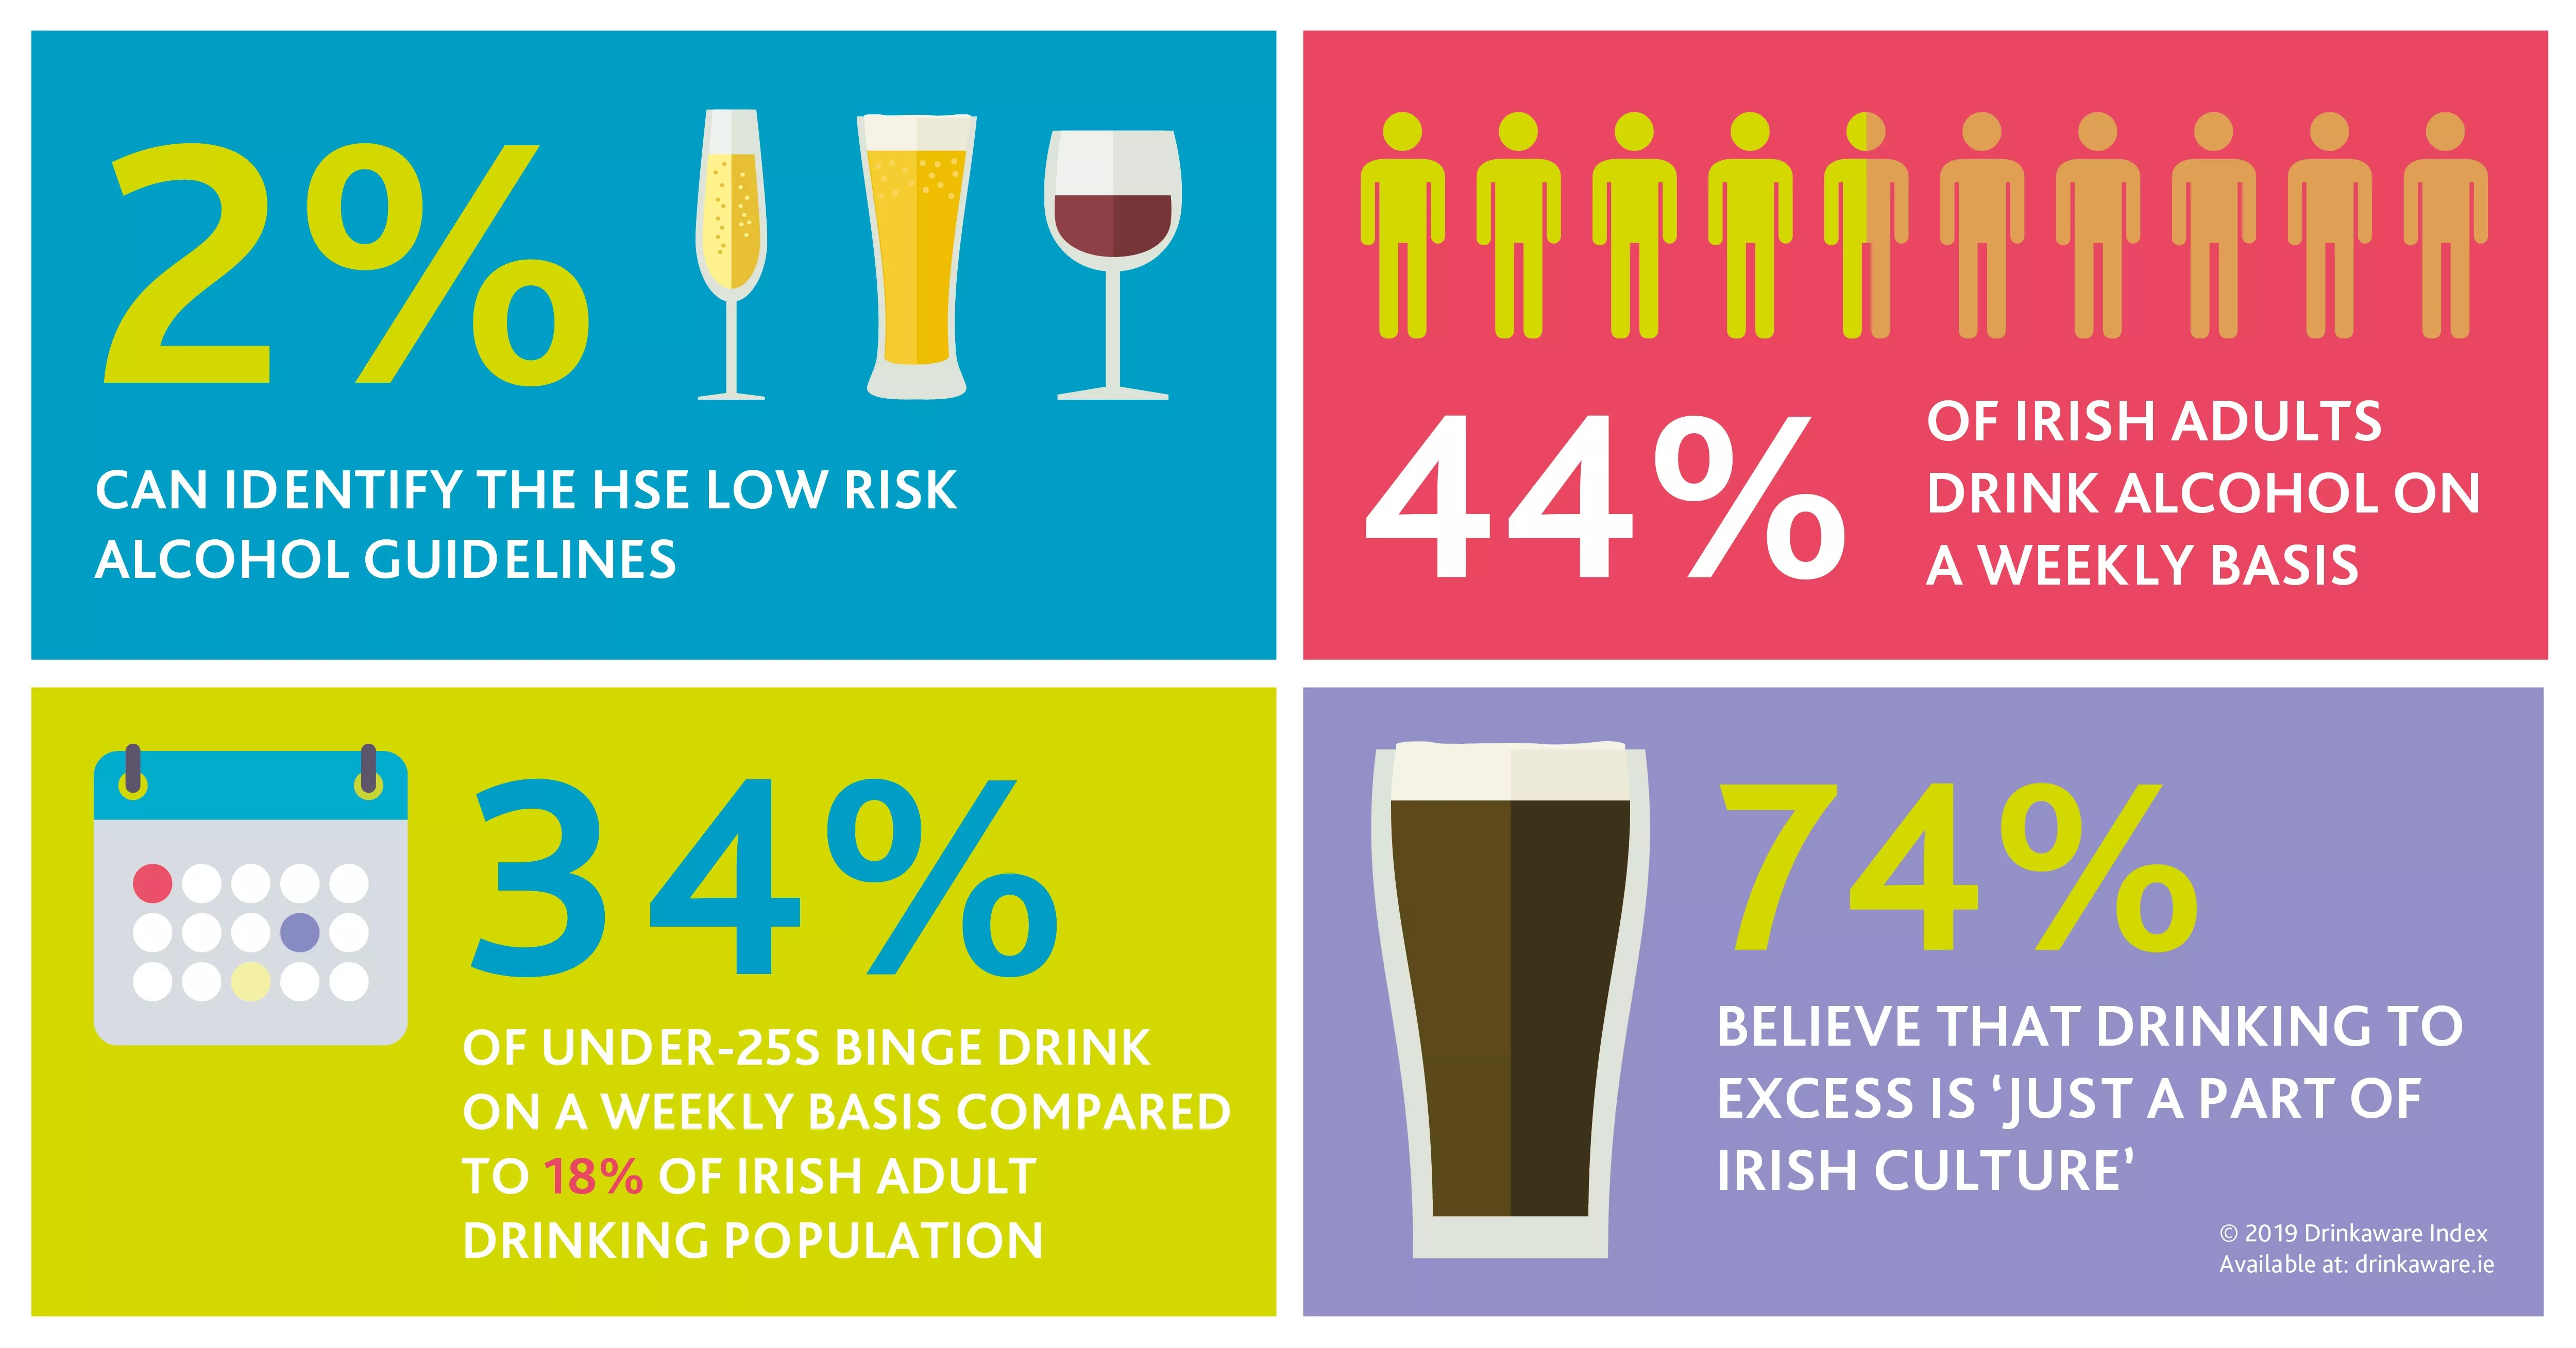 Report shows one in five Irish adults classed hazardous drinkers